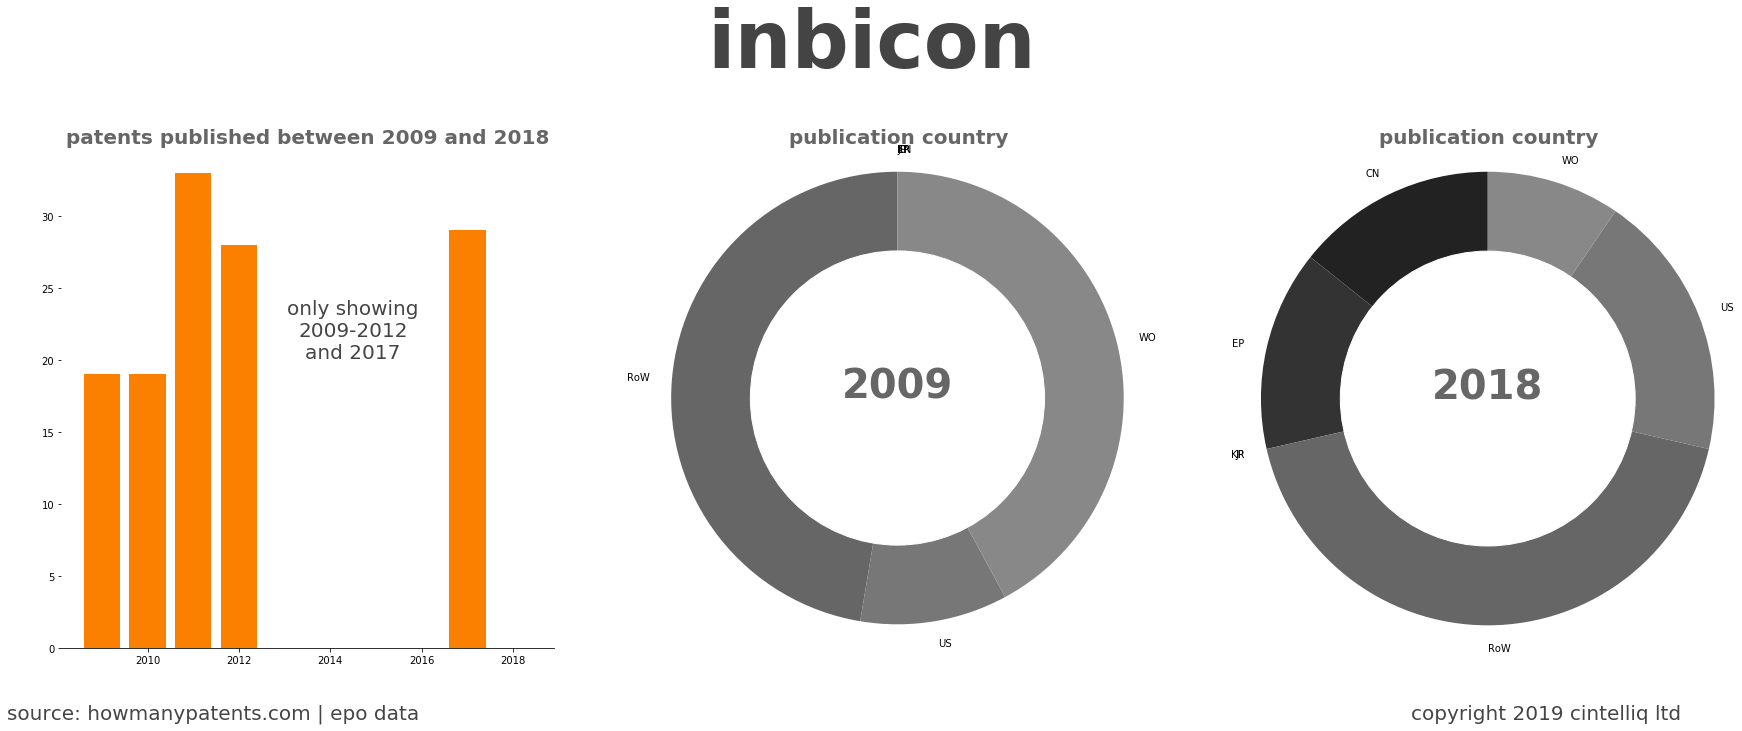 summary of patents for Inbicon